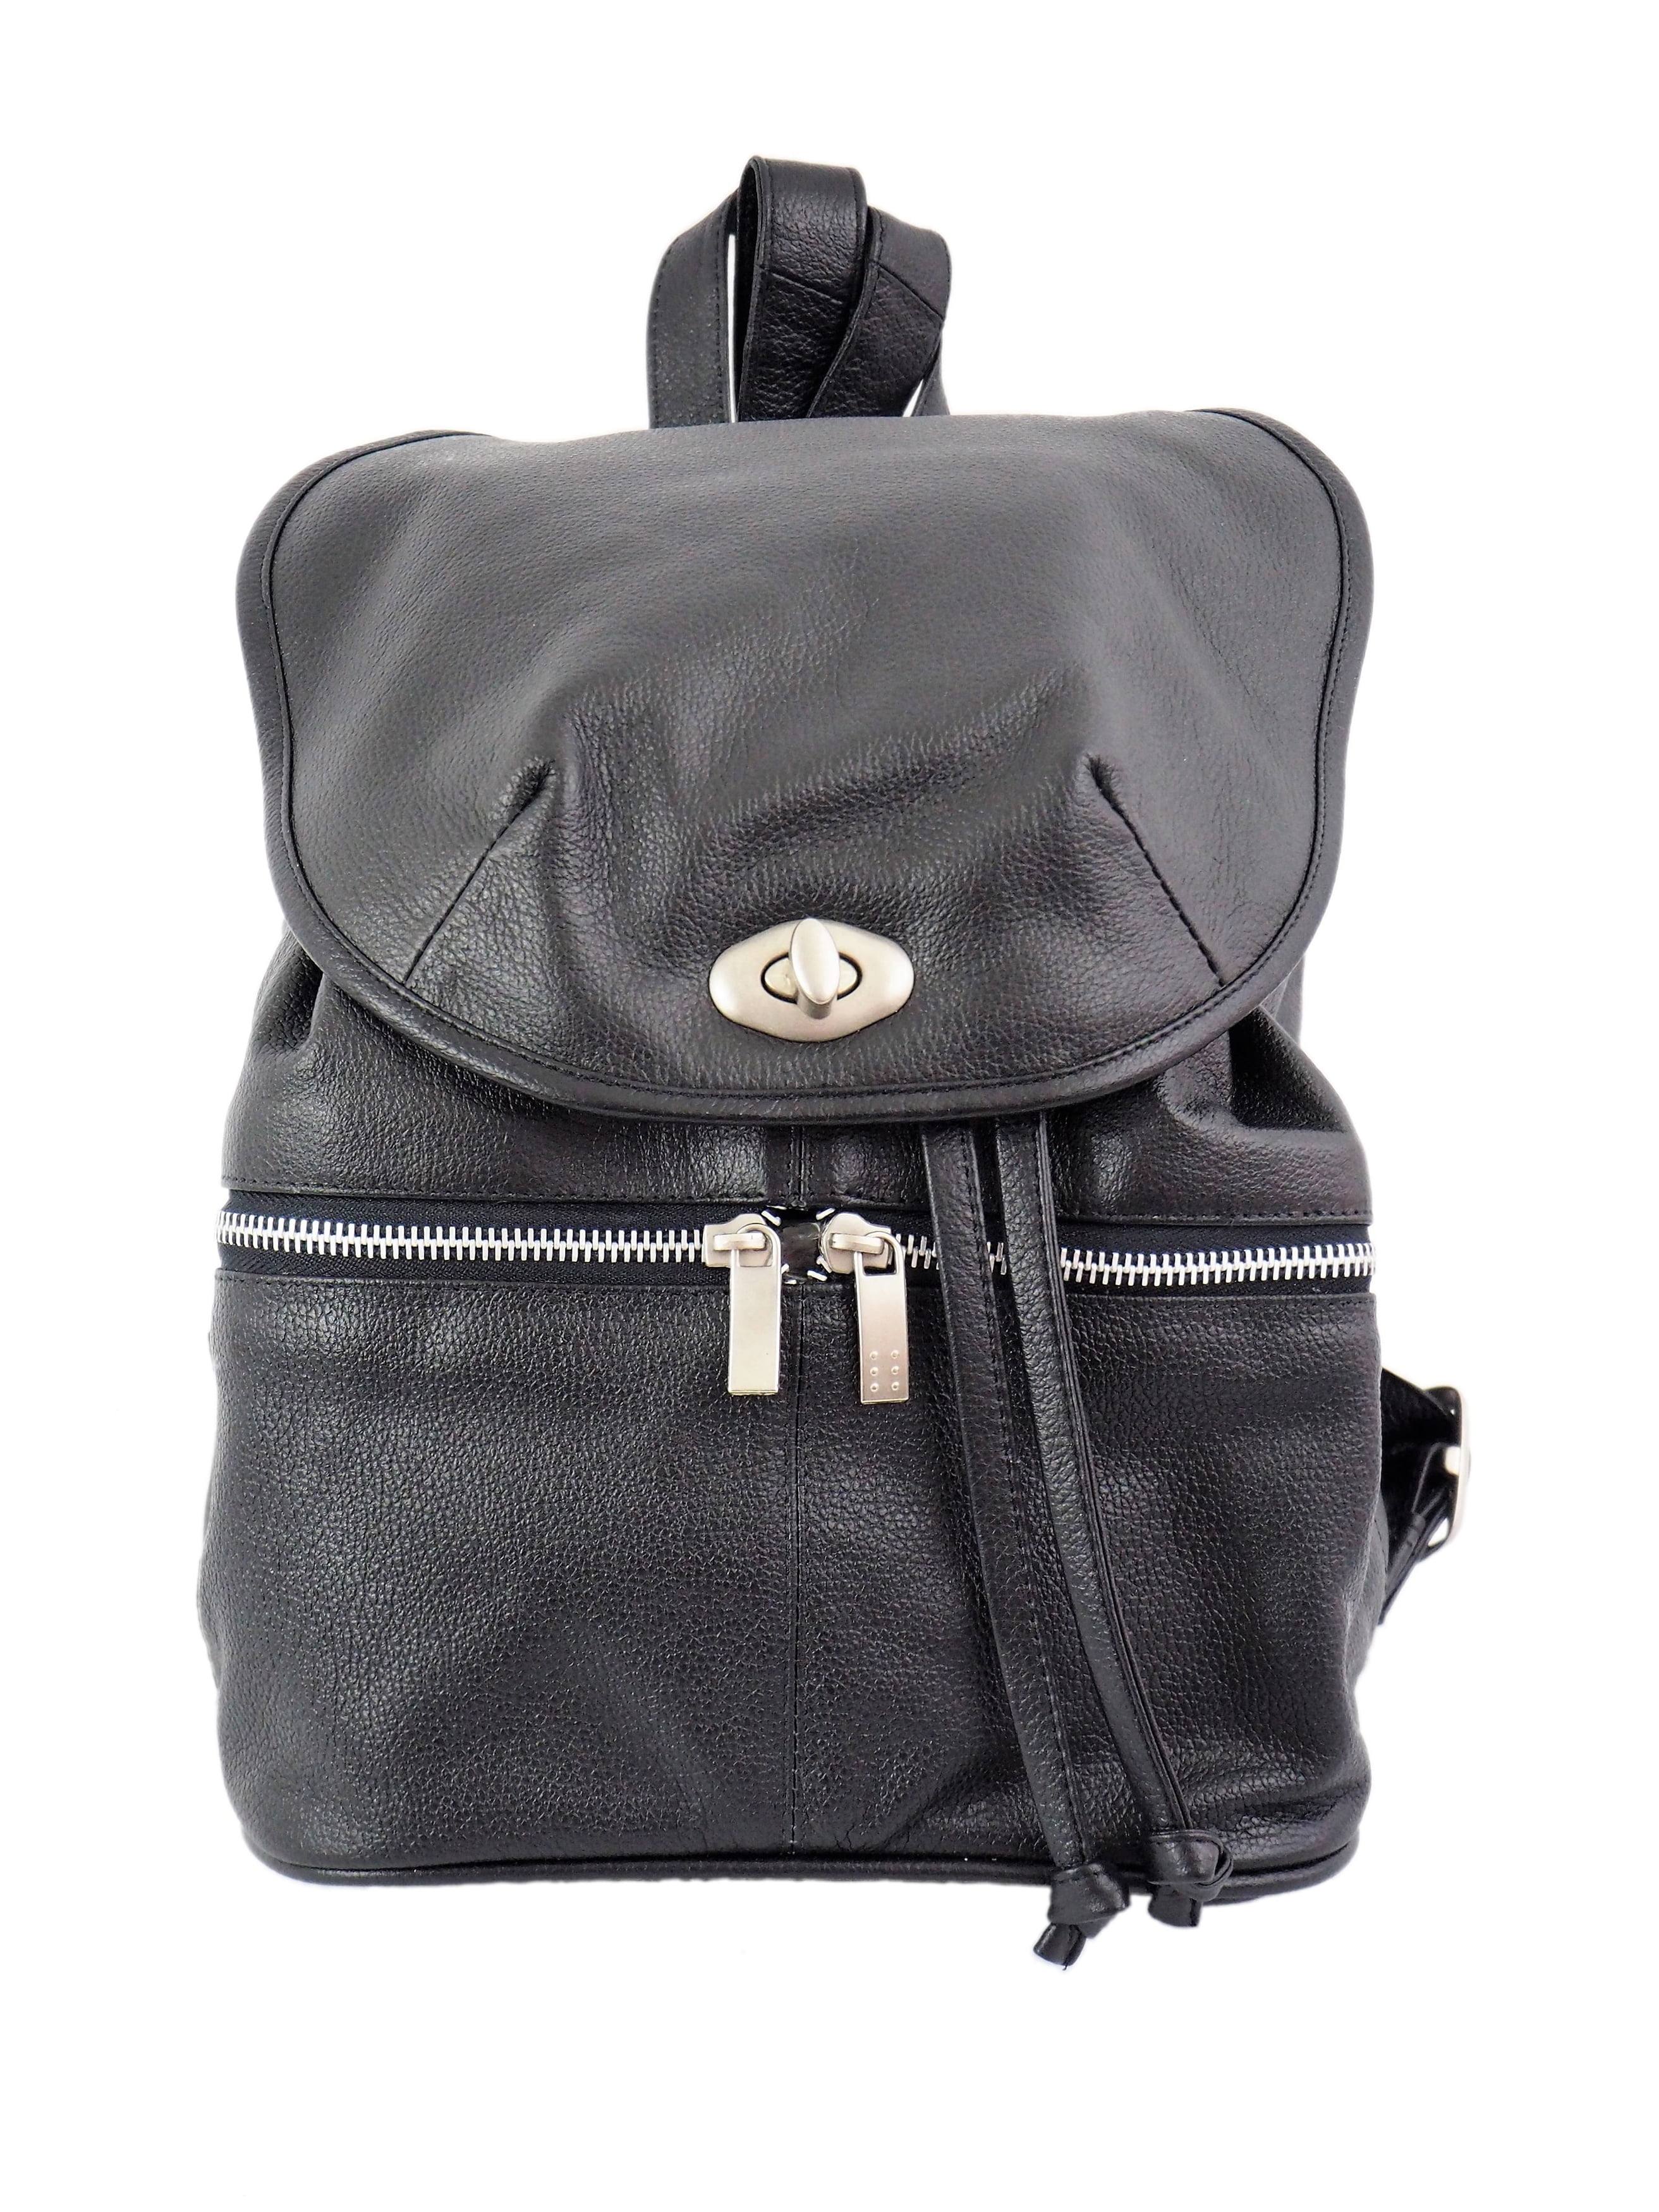 Double Compartment Leather Backpack - Walmart.com